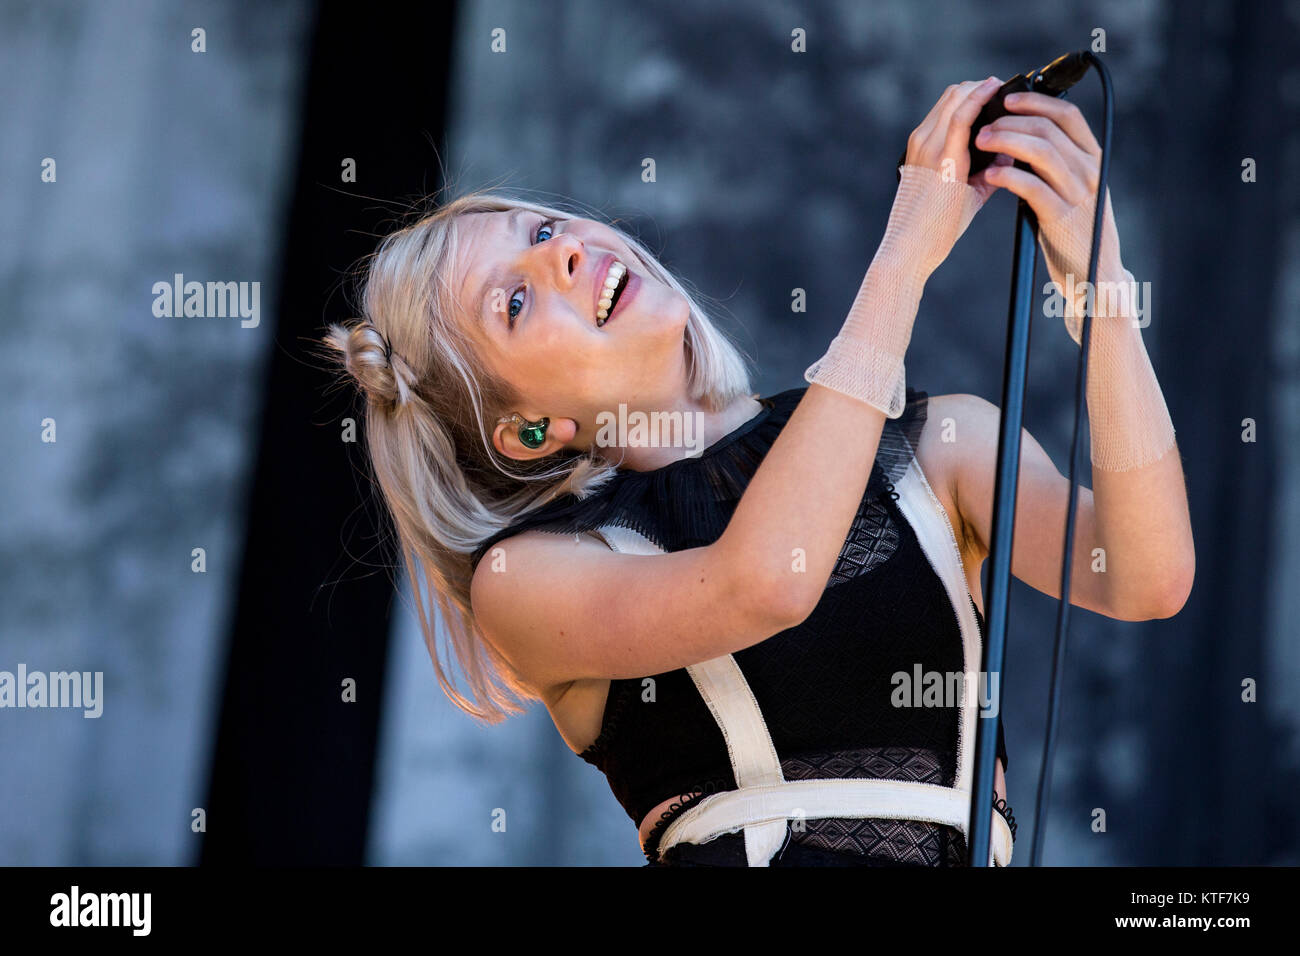 The talented Norwegian singer, musician and songwriter AURORA performs a live concert at the Norwegian music festival Øyafestivalen 2016 in Oslo. Norway, 10/08 2016. Stock Photo